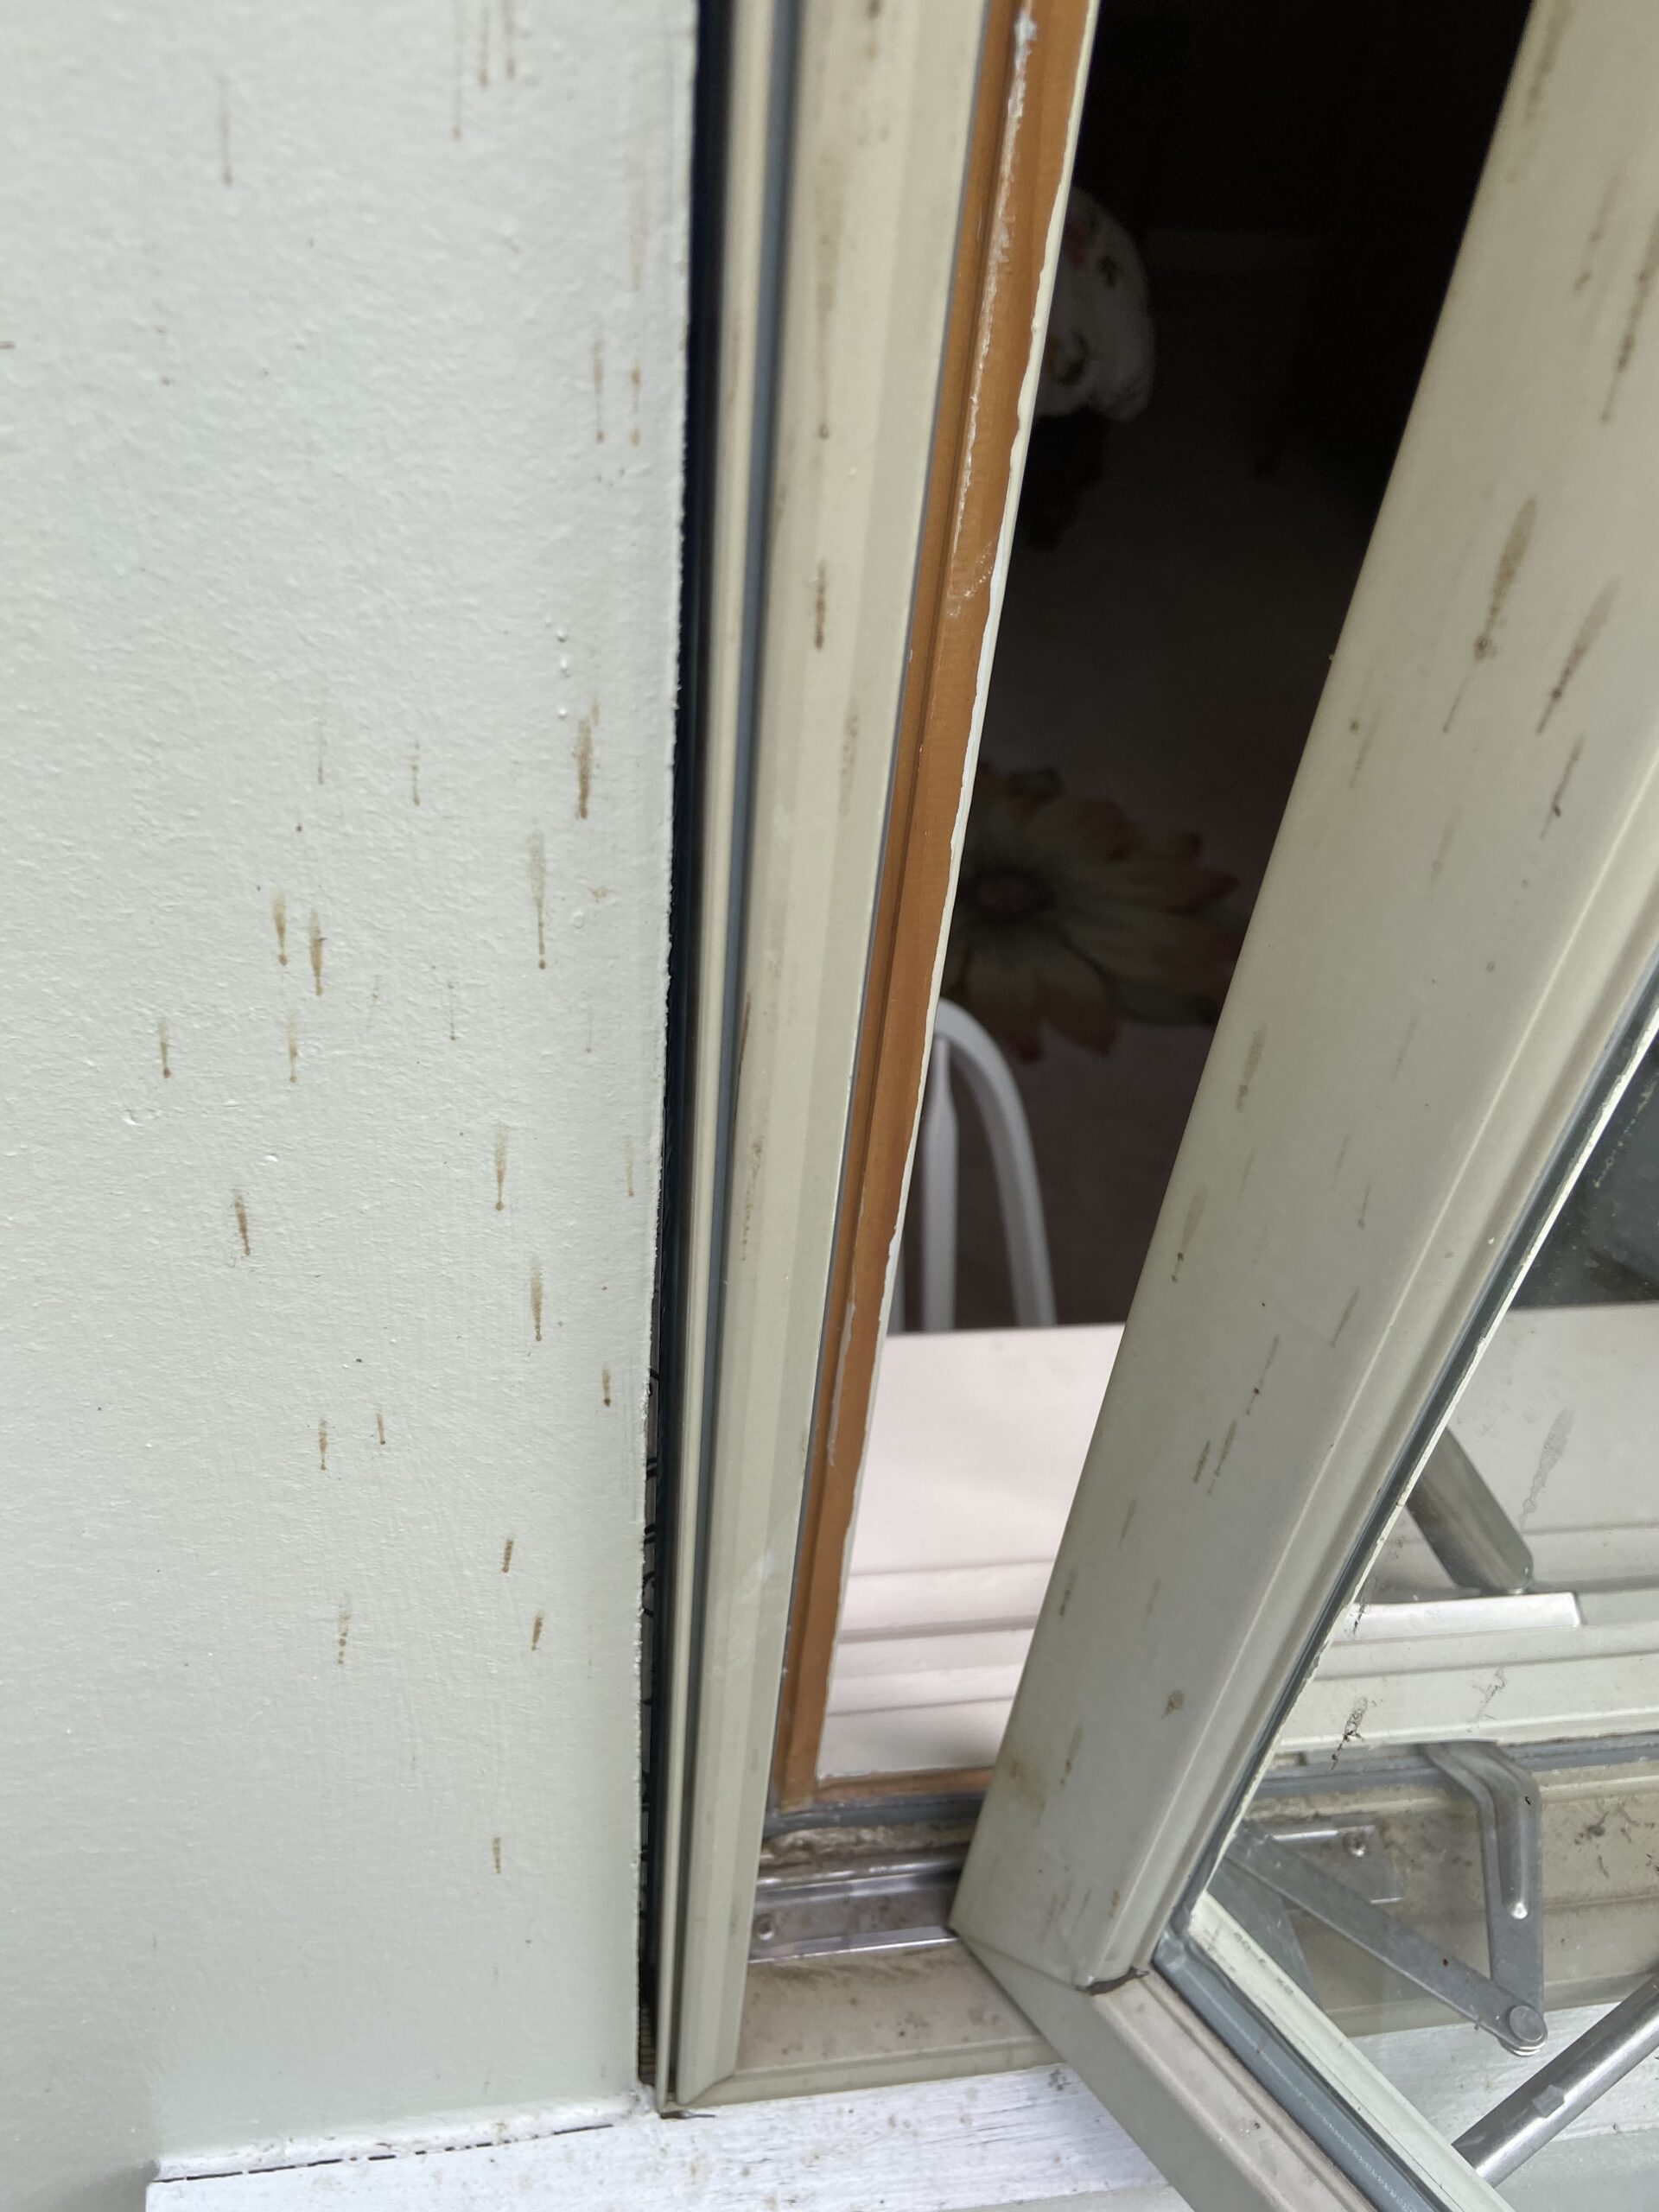 This is a gap between a window and siding that needs to be caulked